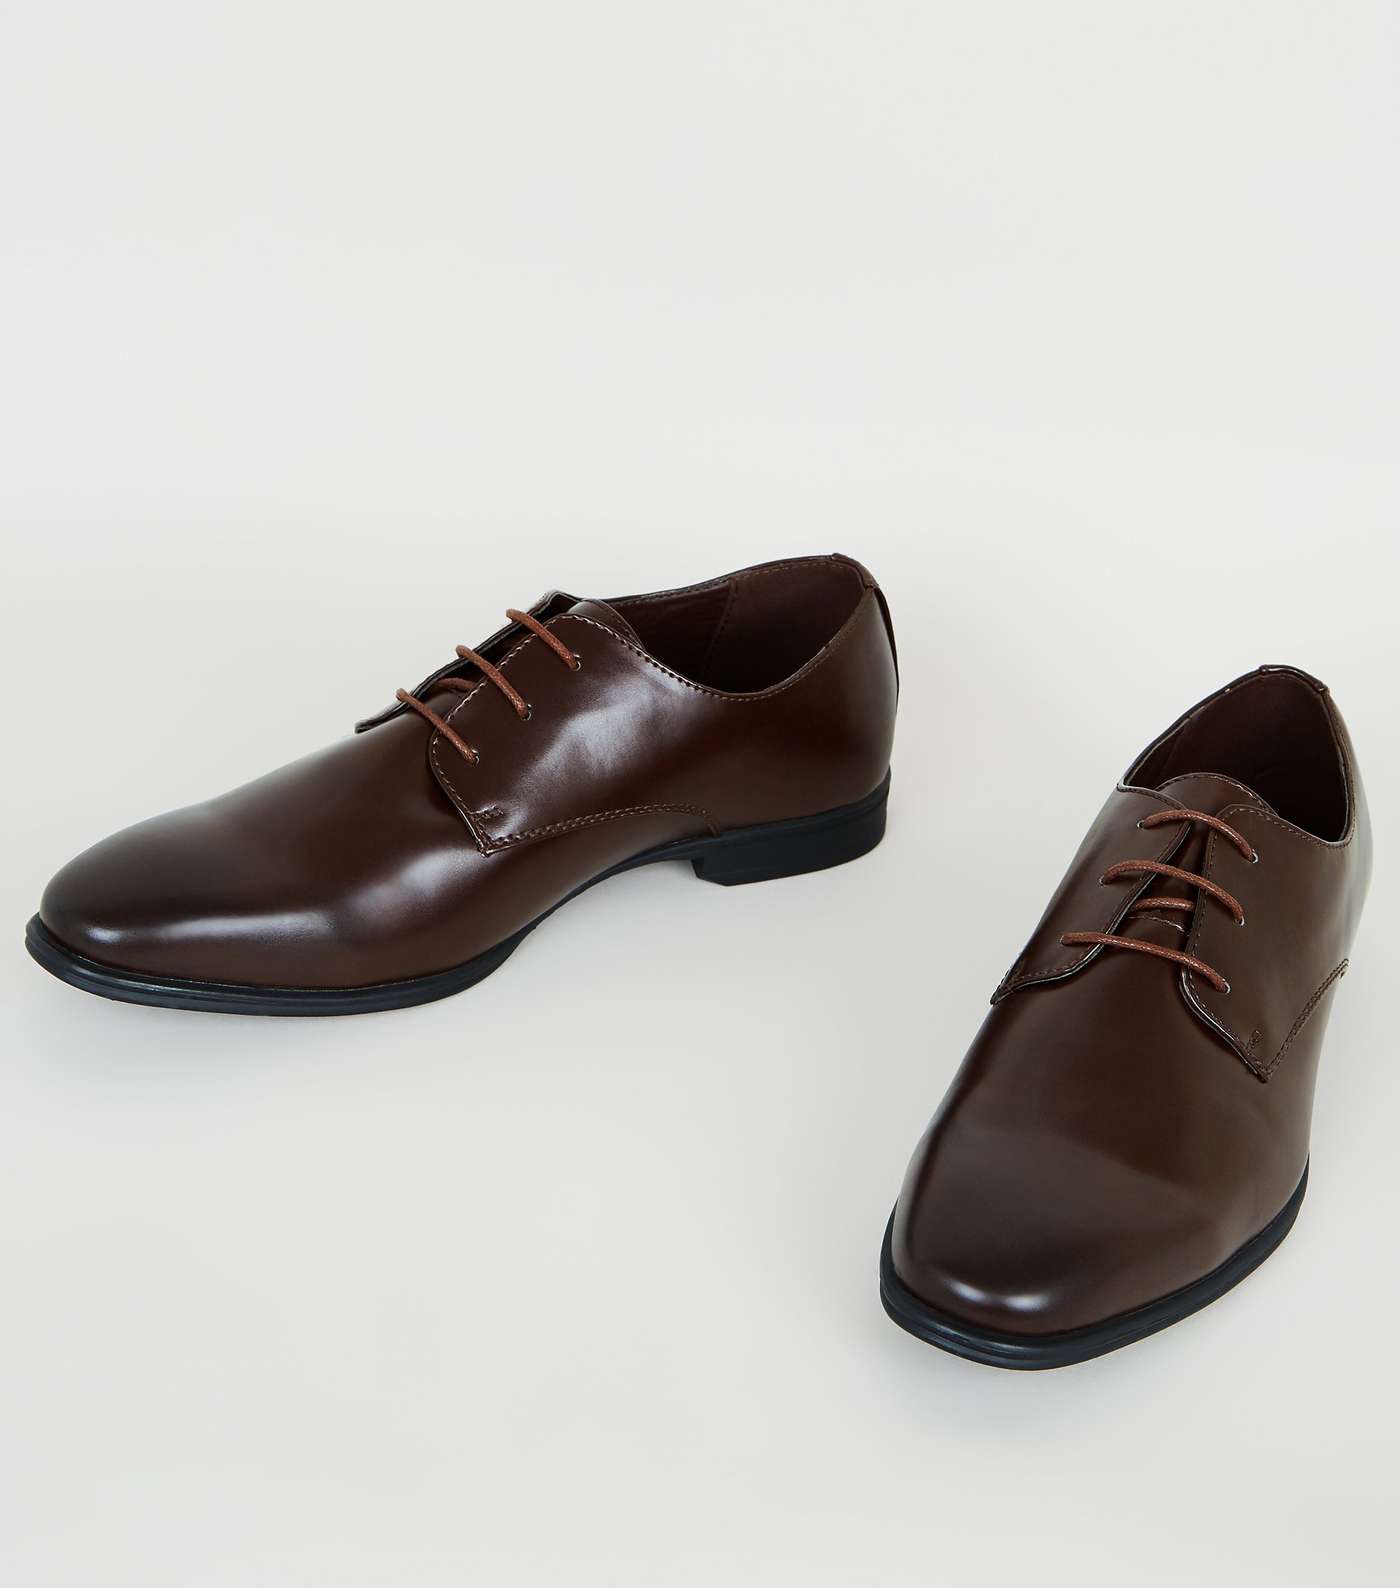 Dark Brown Leather-Look Side Seam Formal Shoes Image 3